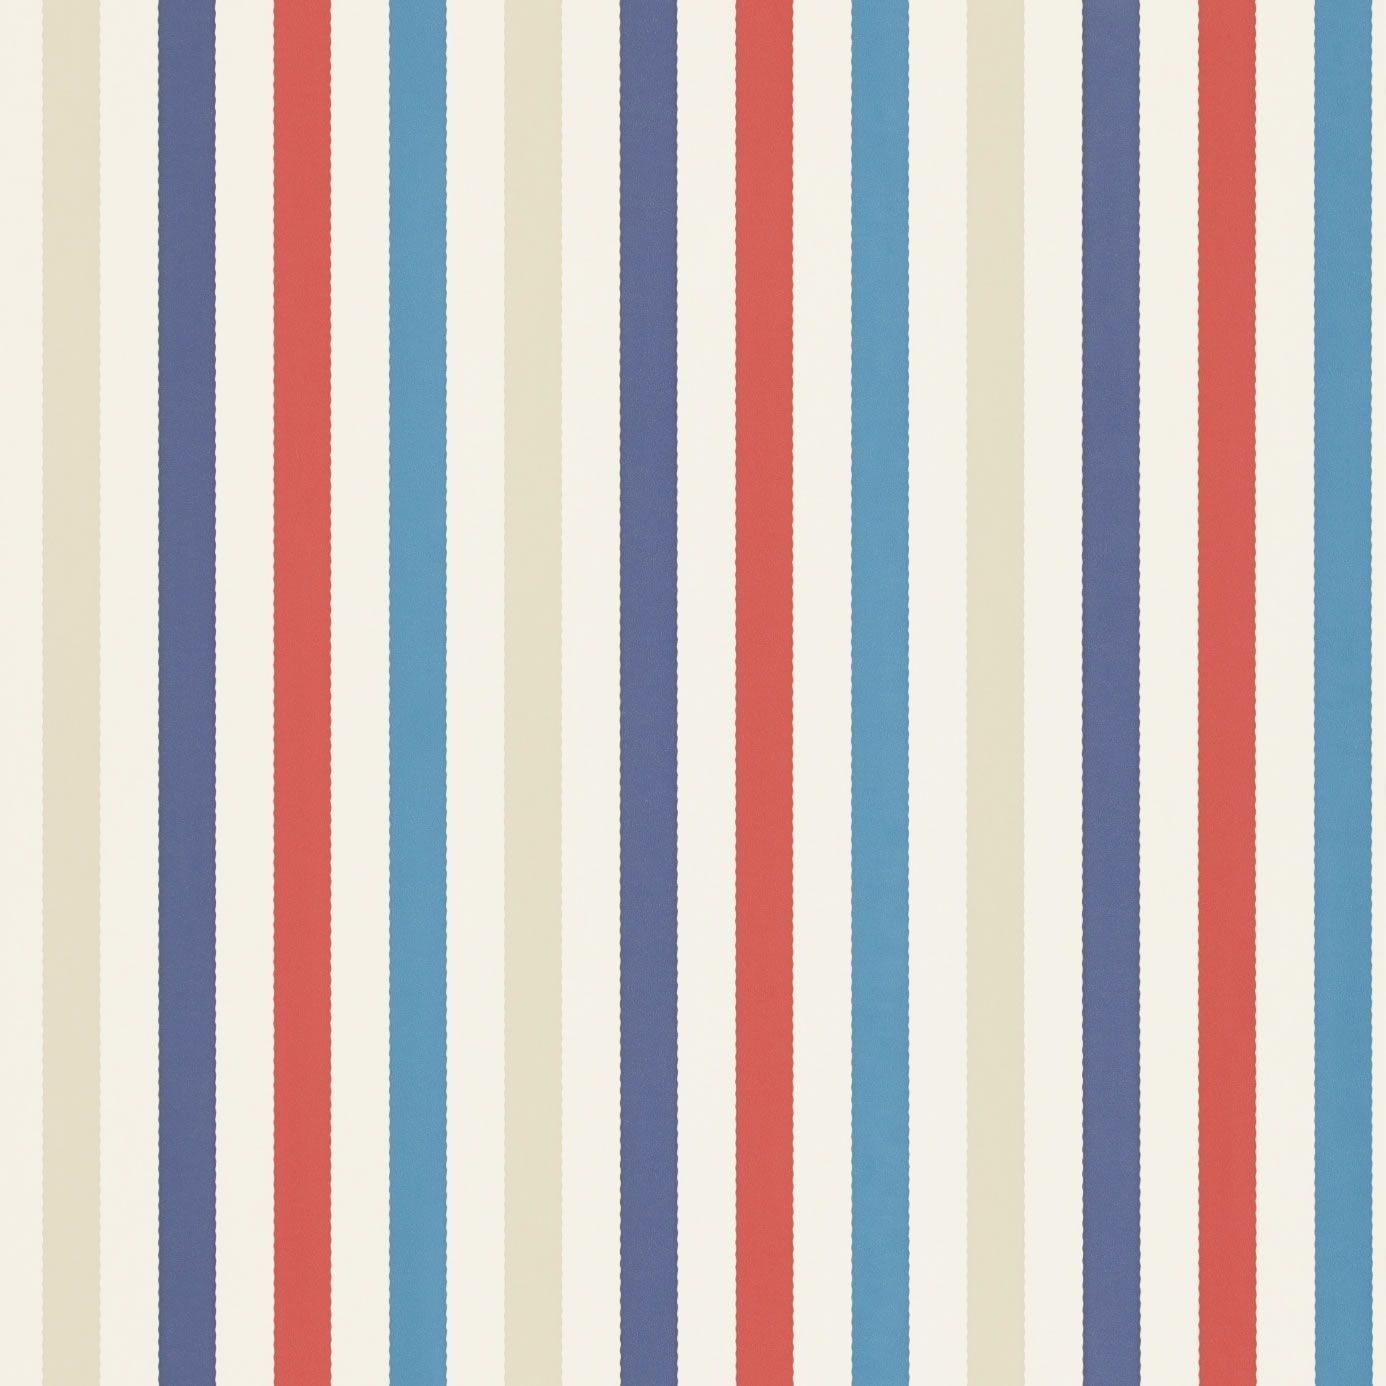 Red And Blue Striped Wallpaper - Desktop Backgrounds